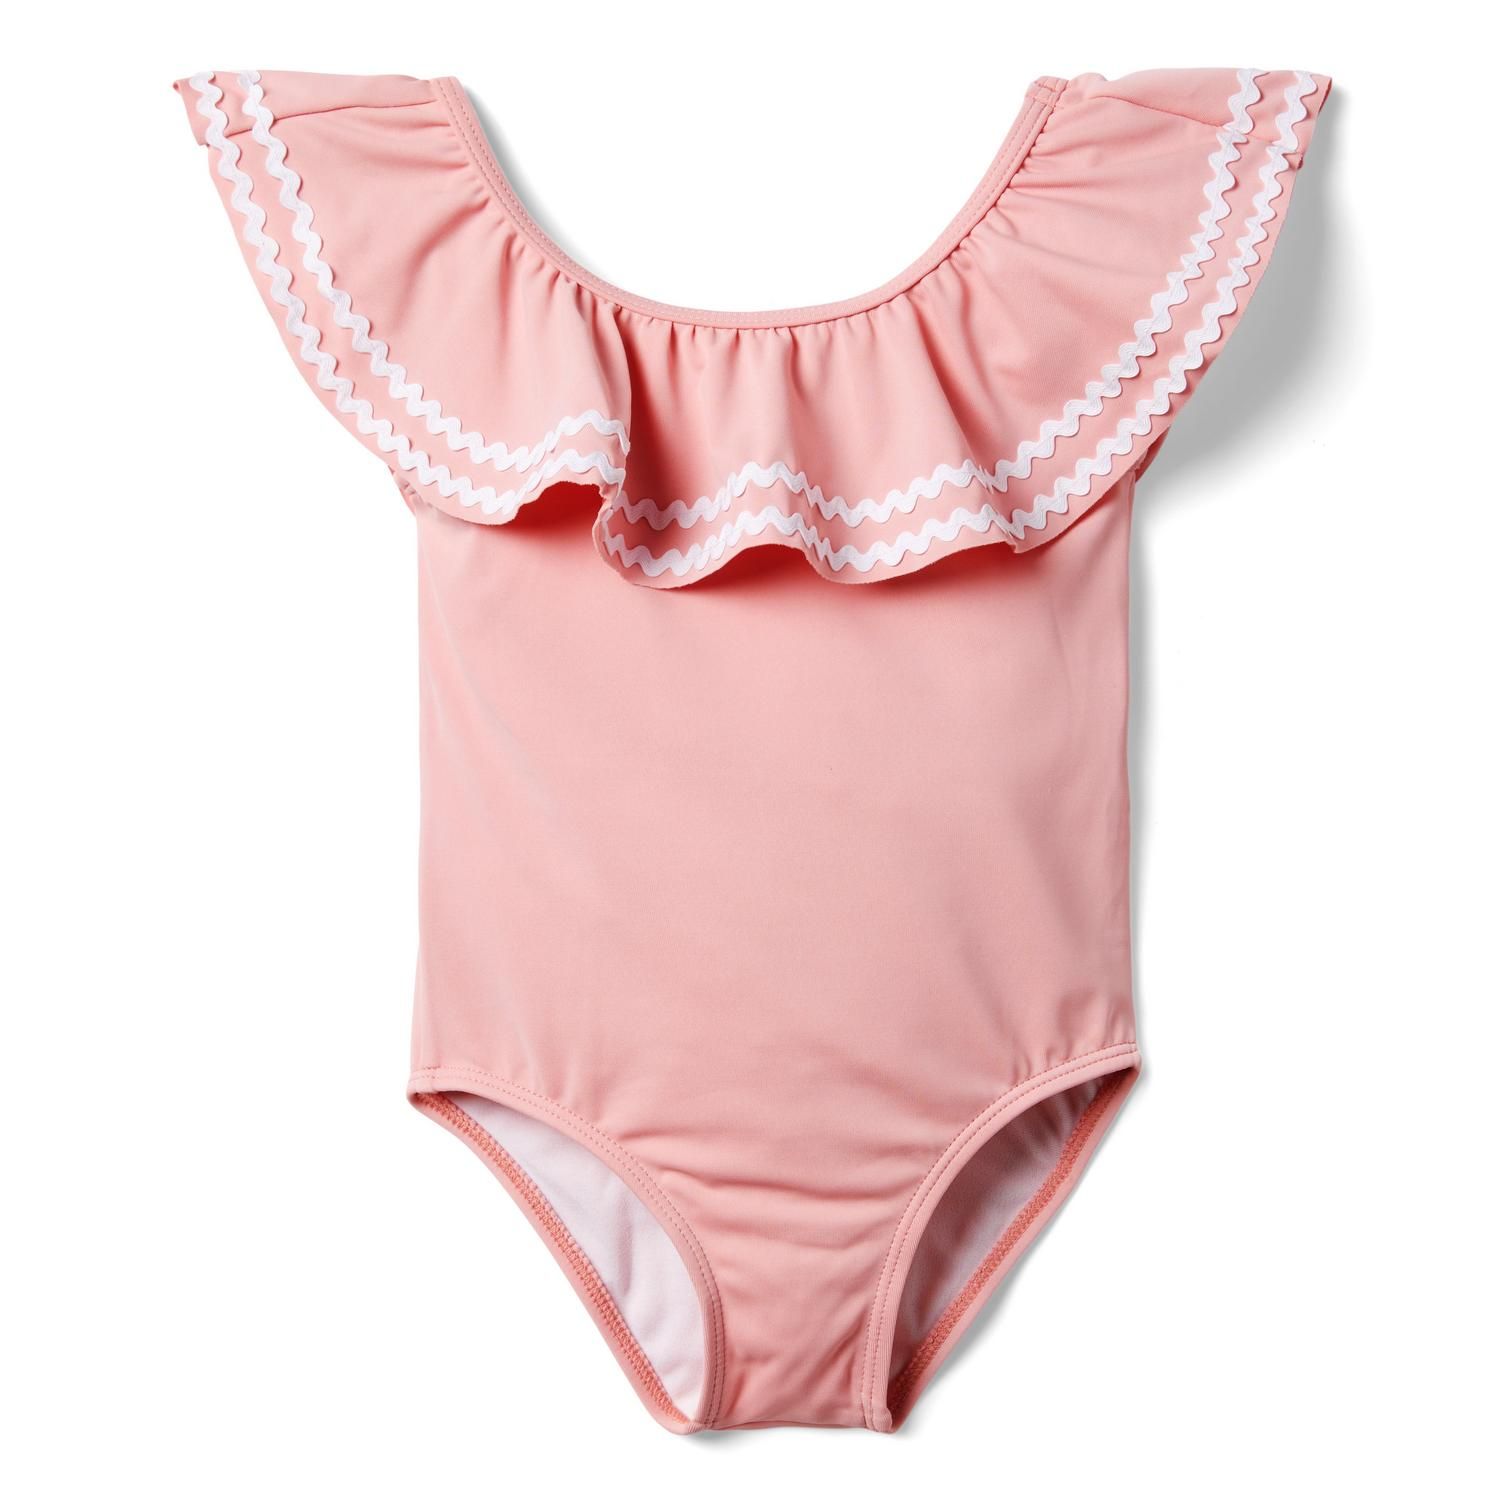 Ric Rac Ruffle Recycled Swimsuit | Janie and Jack